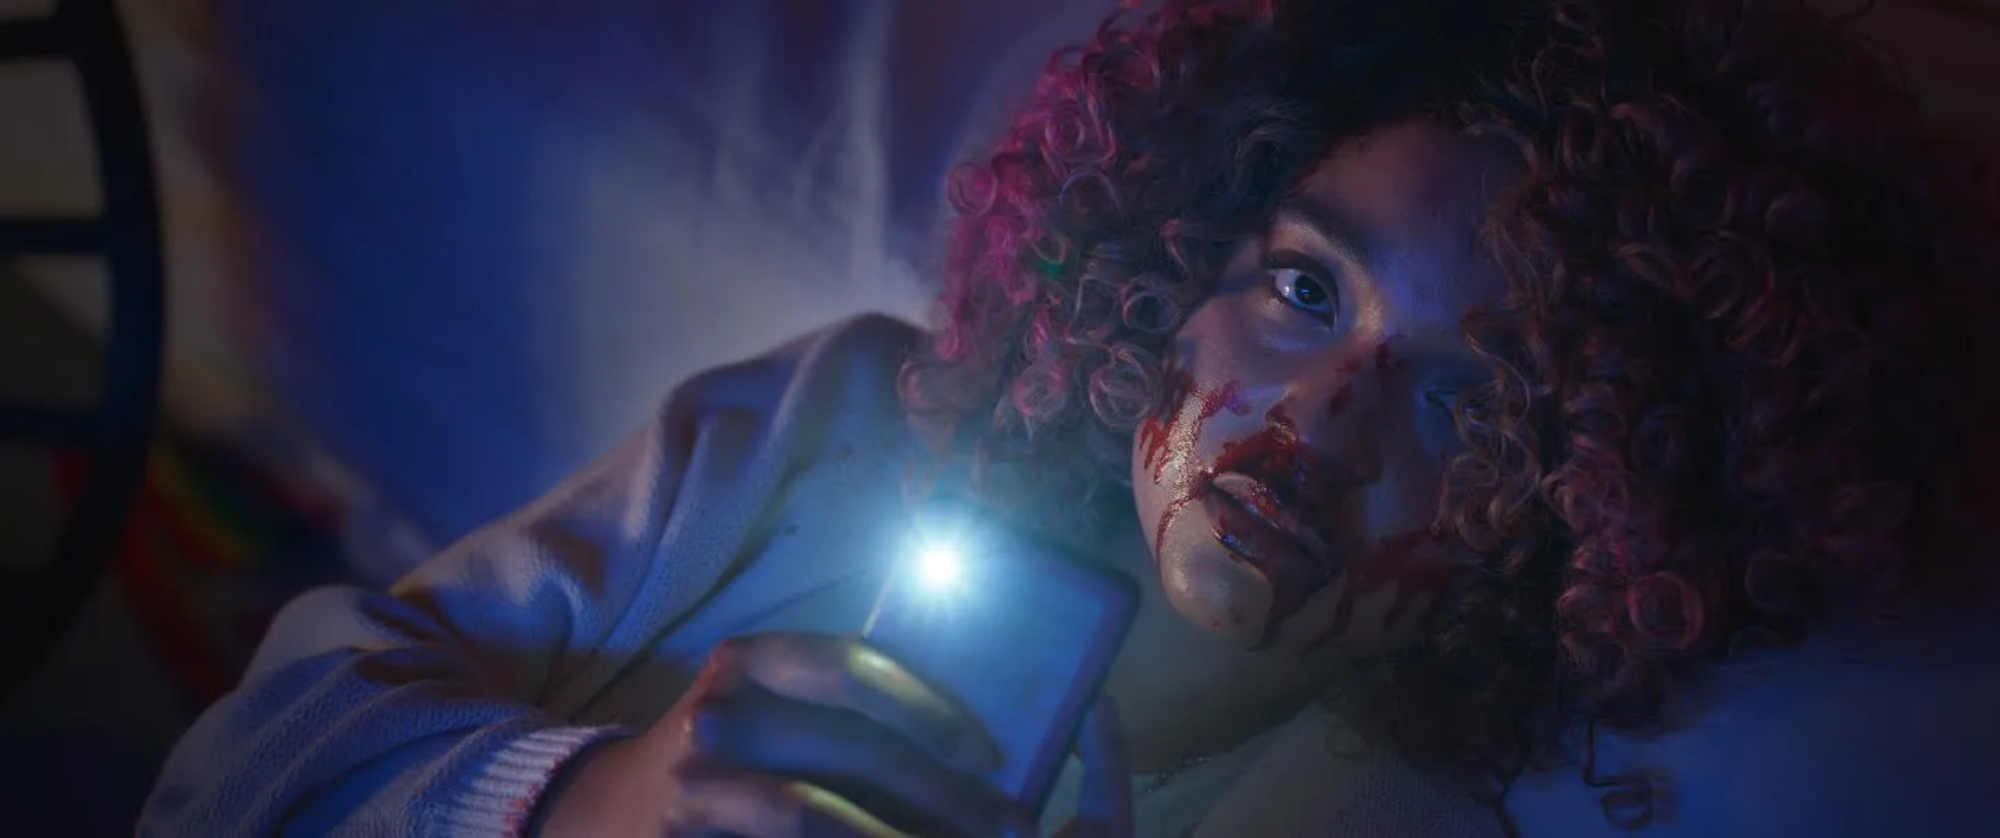 'Sissy' Aisha Dee as Cecilia using phone flashlight with blood on her face looking scared